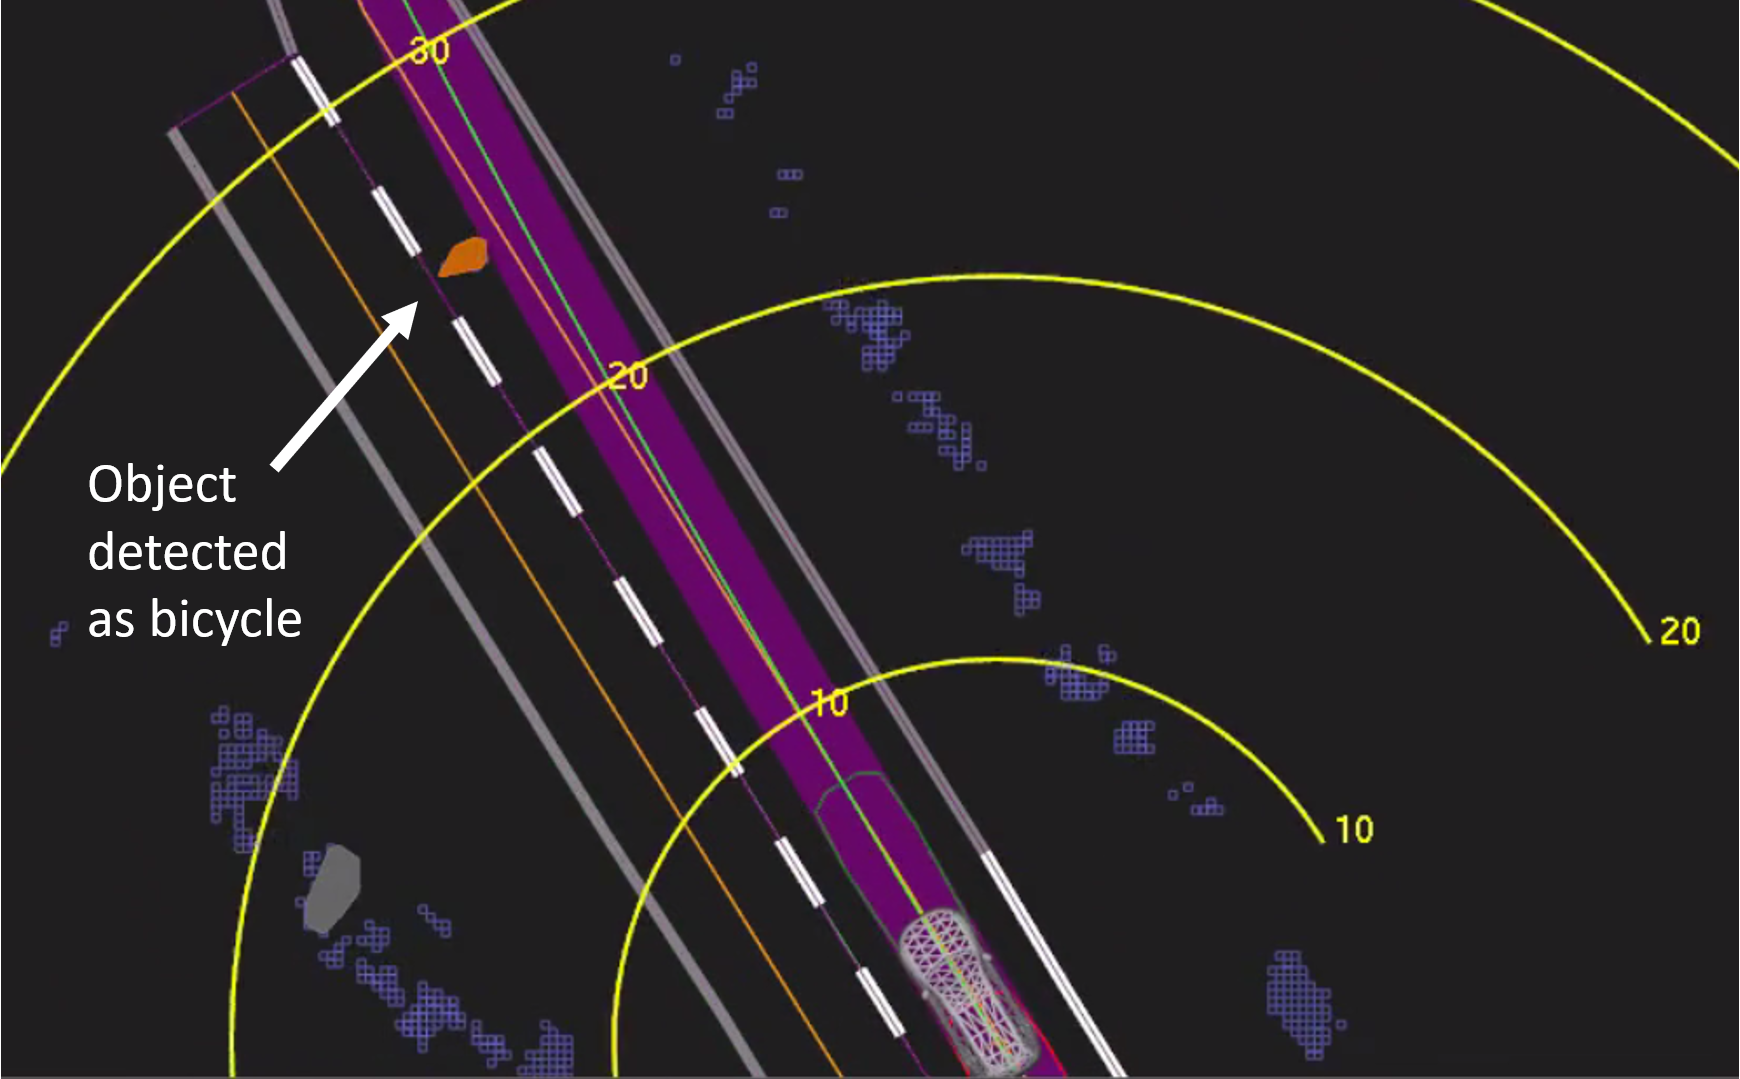 View of the self-driving system data playback at about 1.3 seconds before impact.